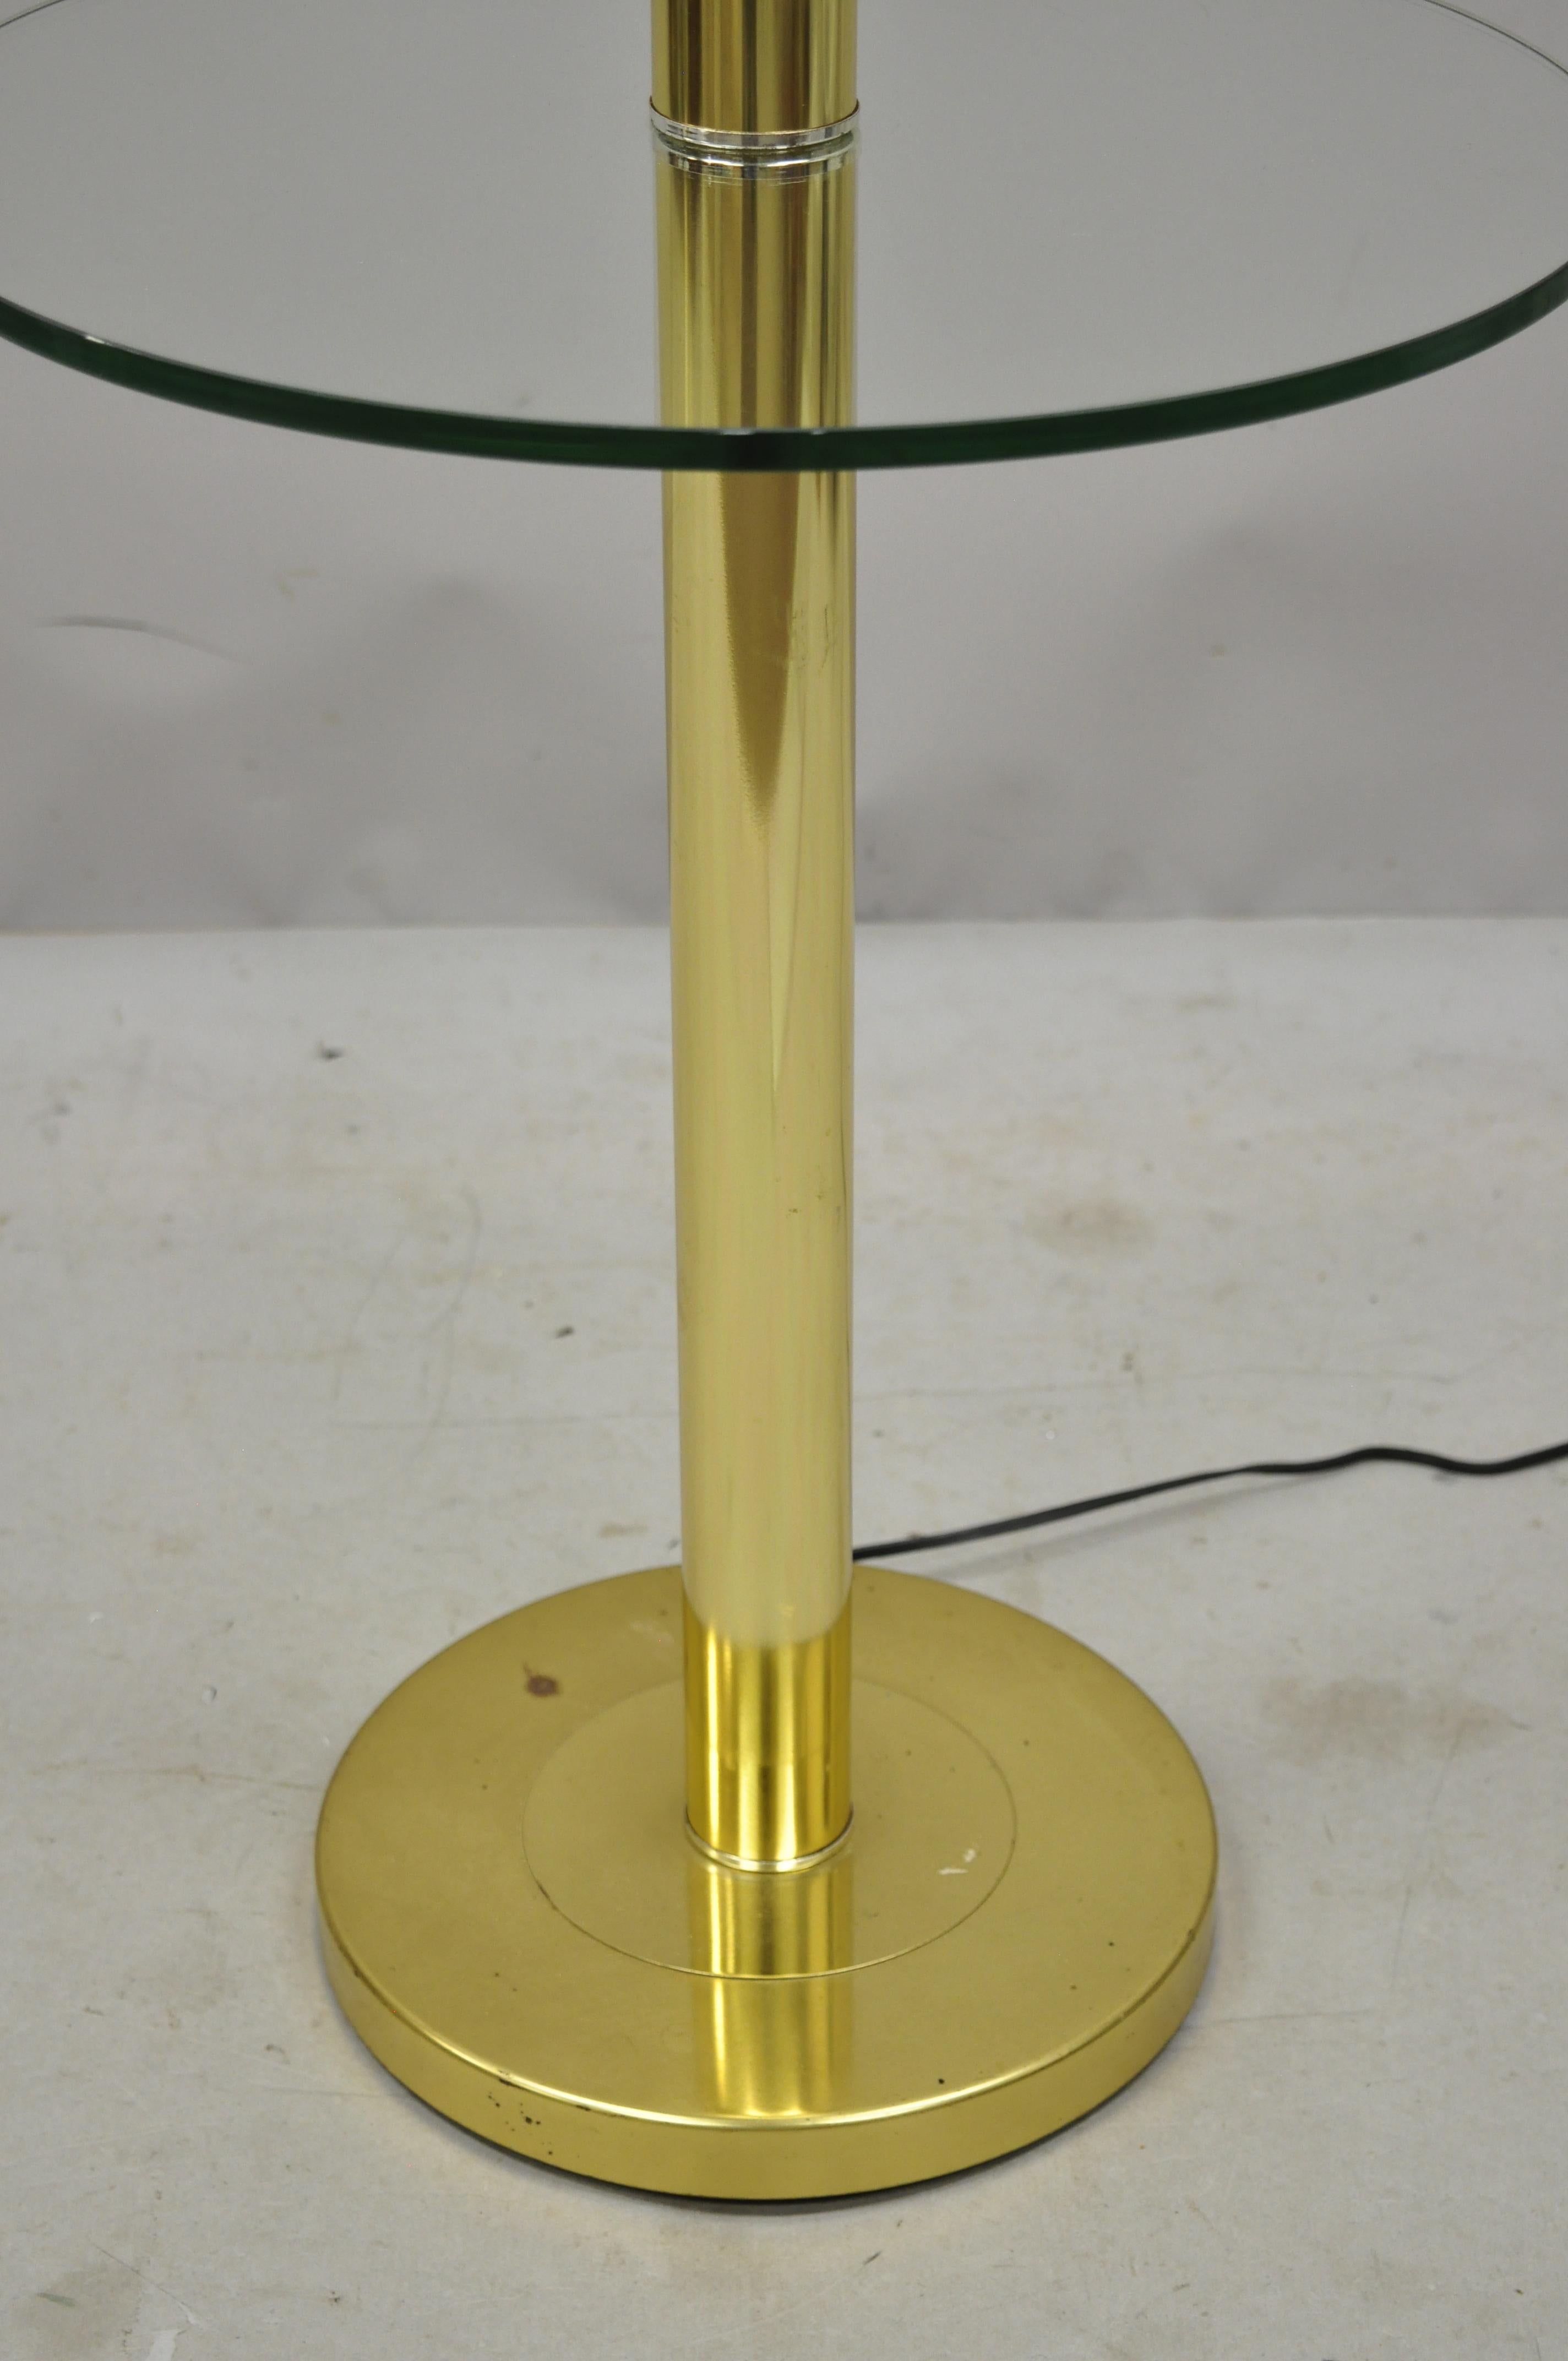 Vintage Mid-Century Modern Lucite Brass Glass Pole Floor Lamp Side Table 'A' In Good Condition For Sale In Philadelphia, PA